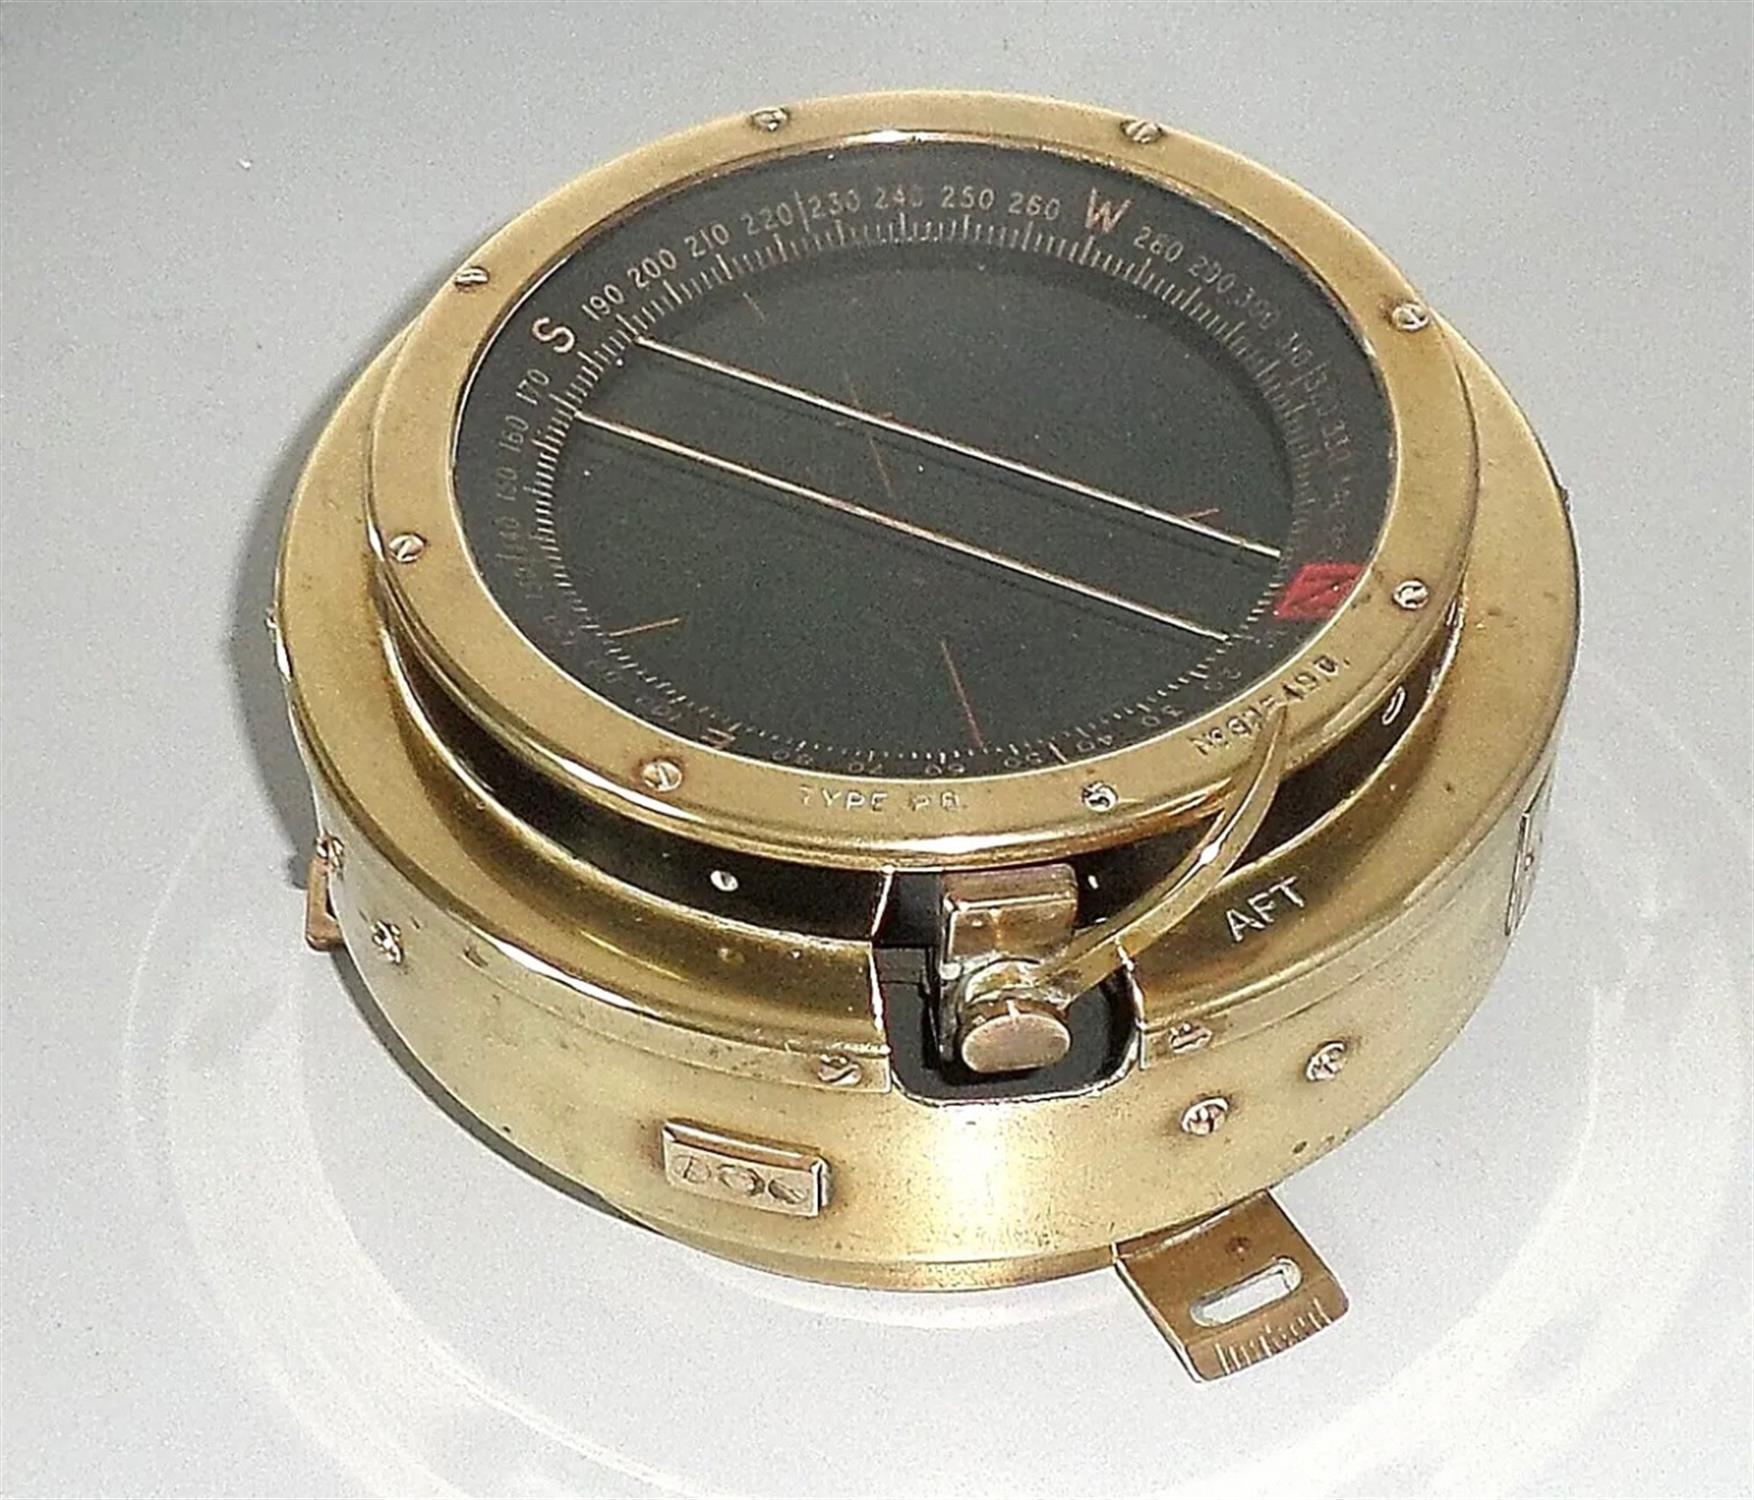 WWII Spitfire Compass- Air Ministry, Type P-8 REF. 6A/726 dating to 1943 - Image 3 of 9